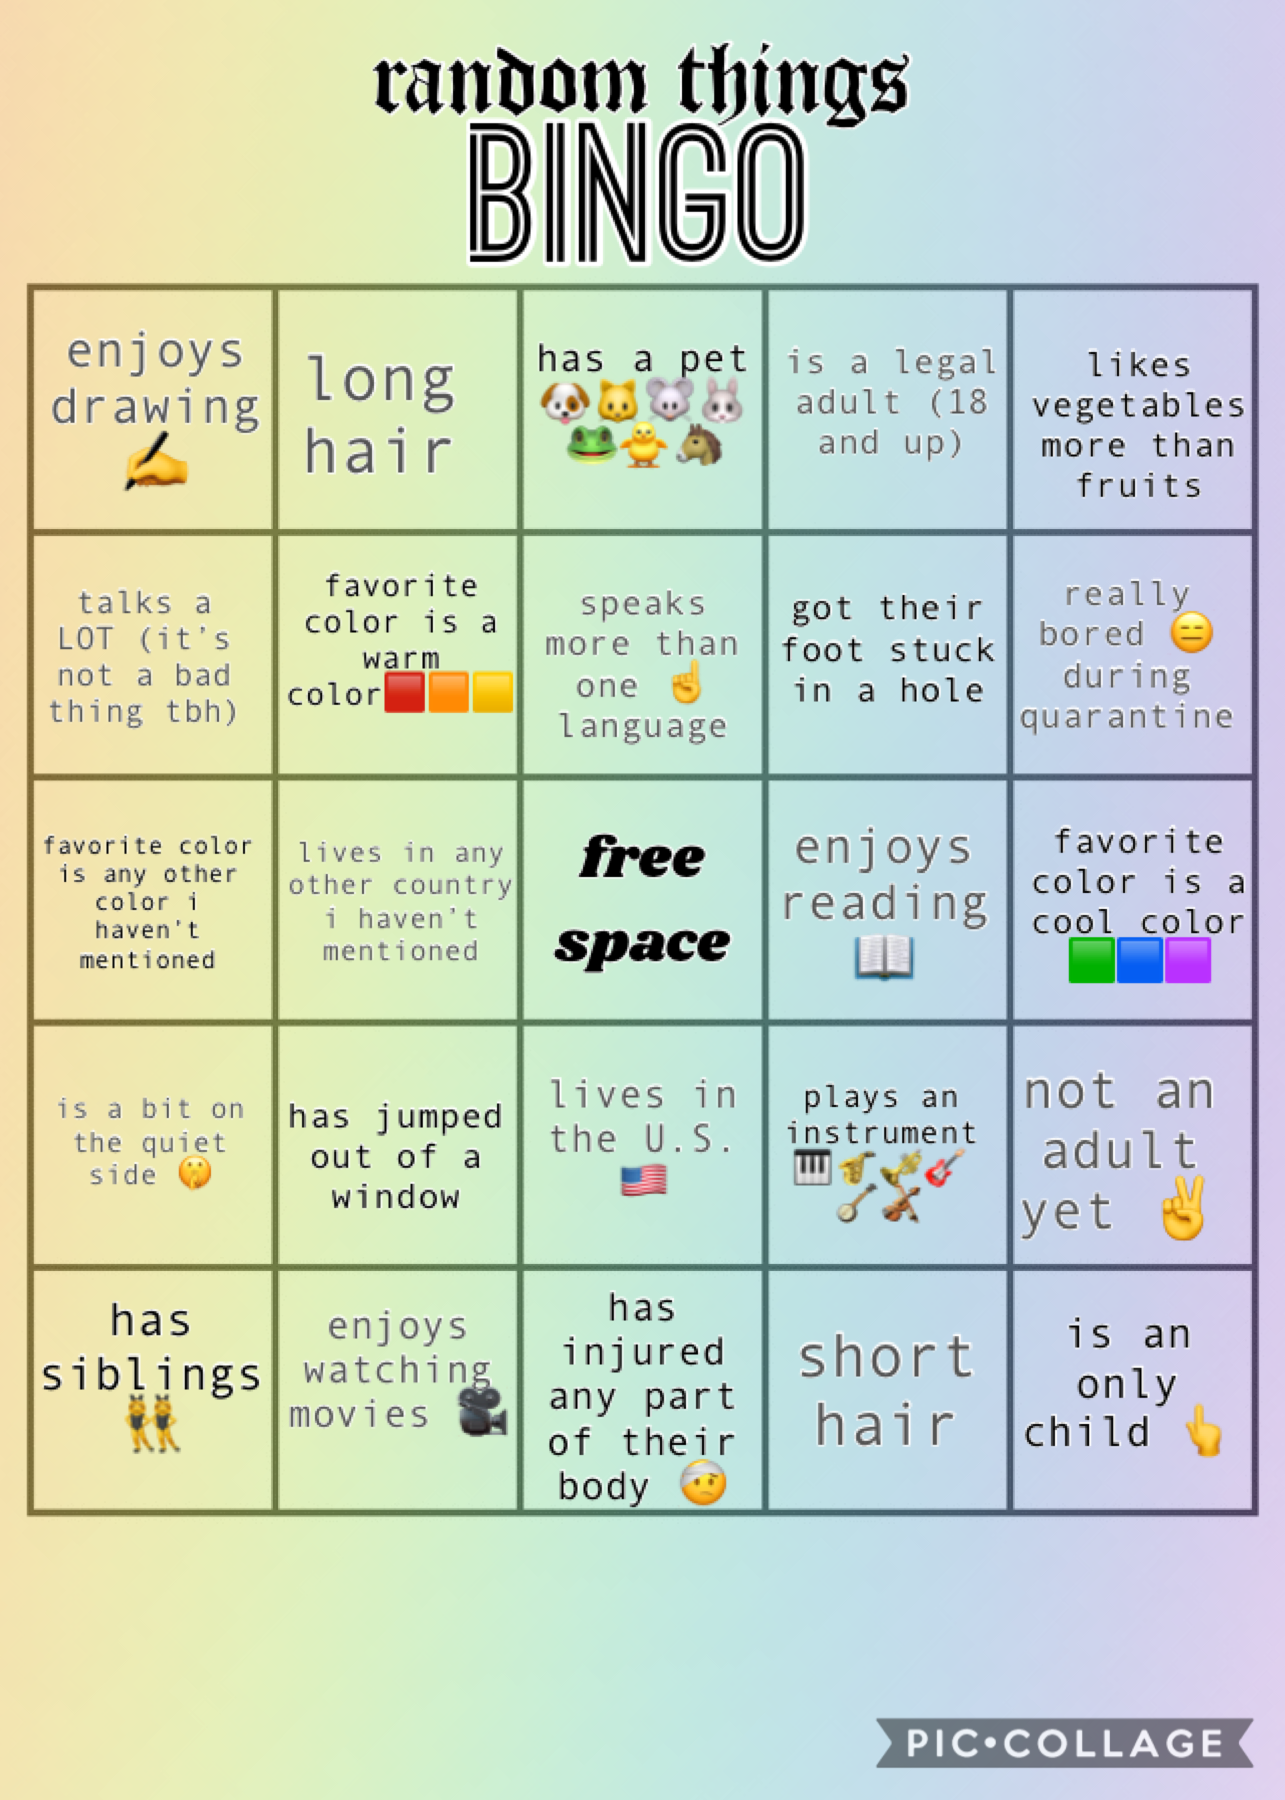 click
i made a bingo with some random things on it but i hope some of you guys will do it 😊please :) I’ll leave mine in the remixes as well